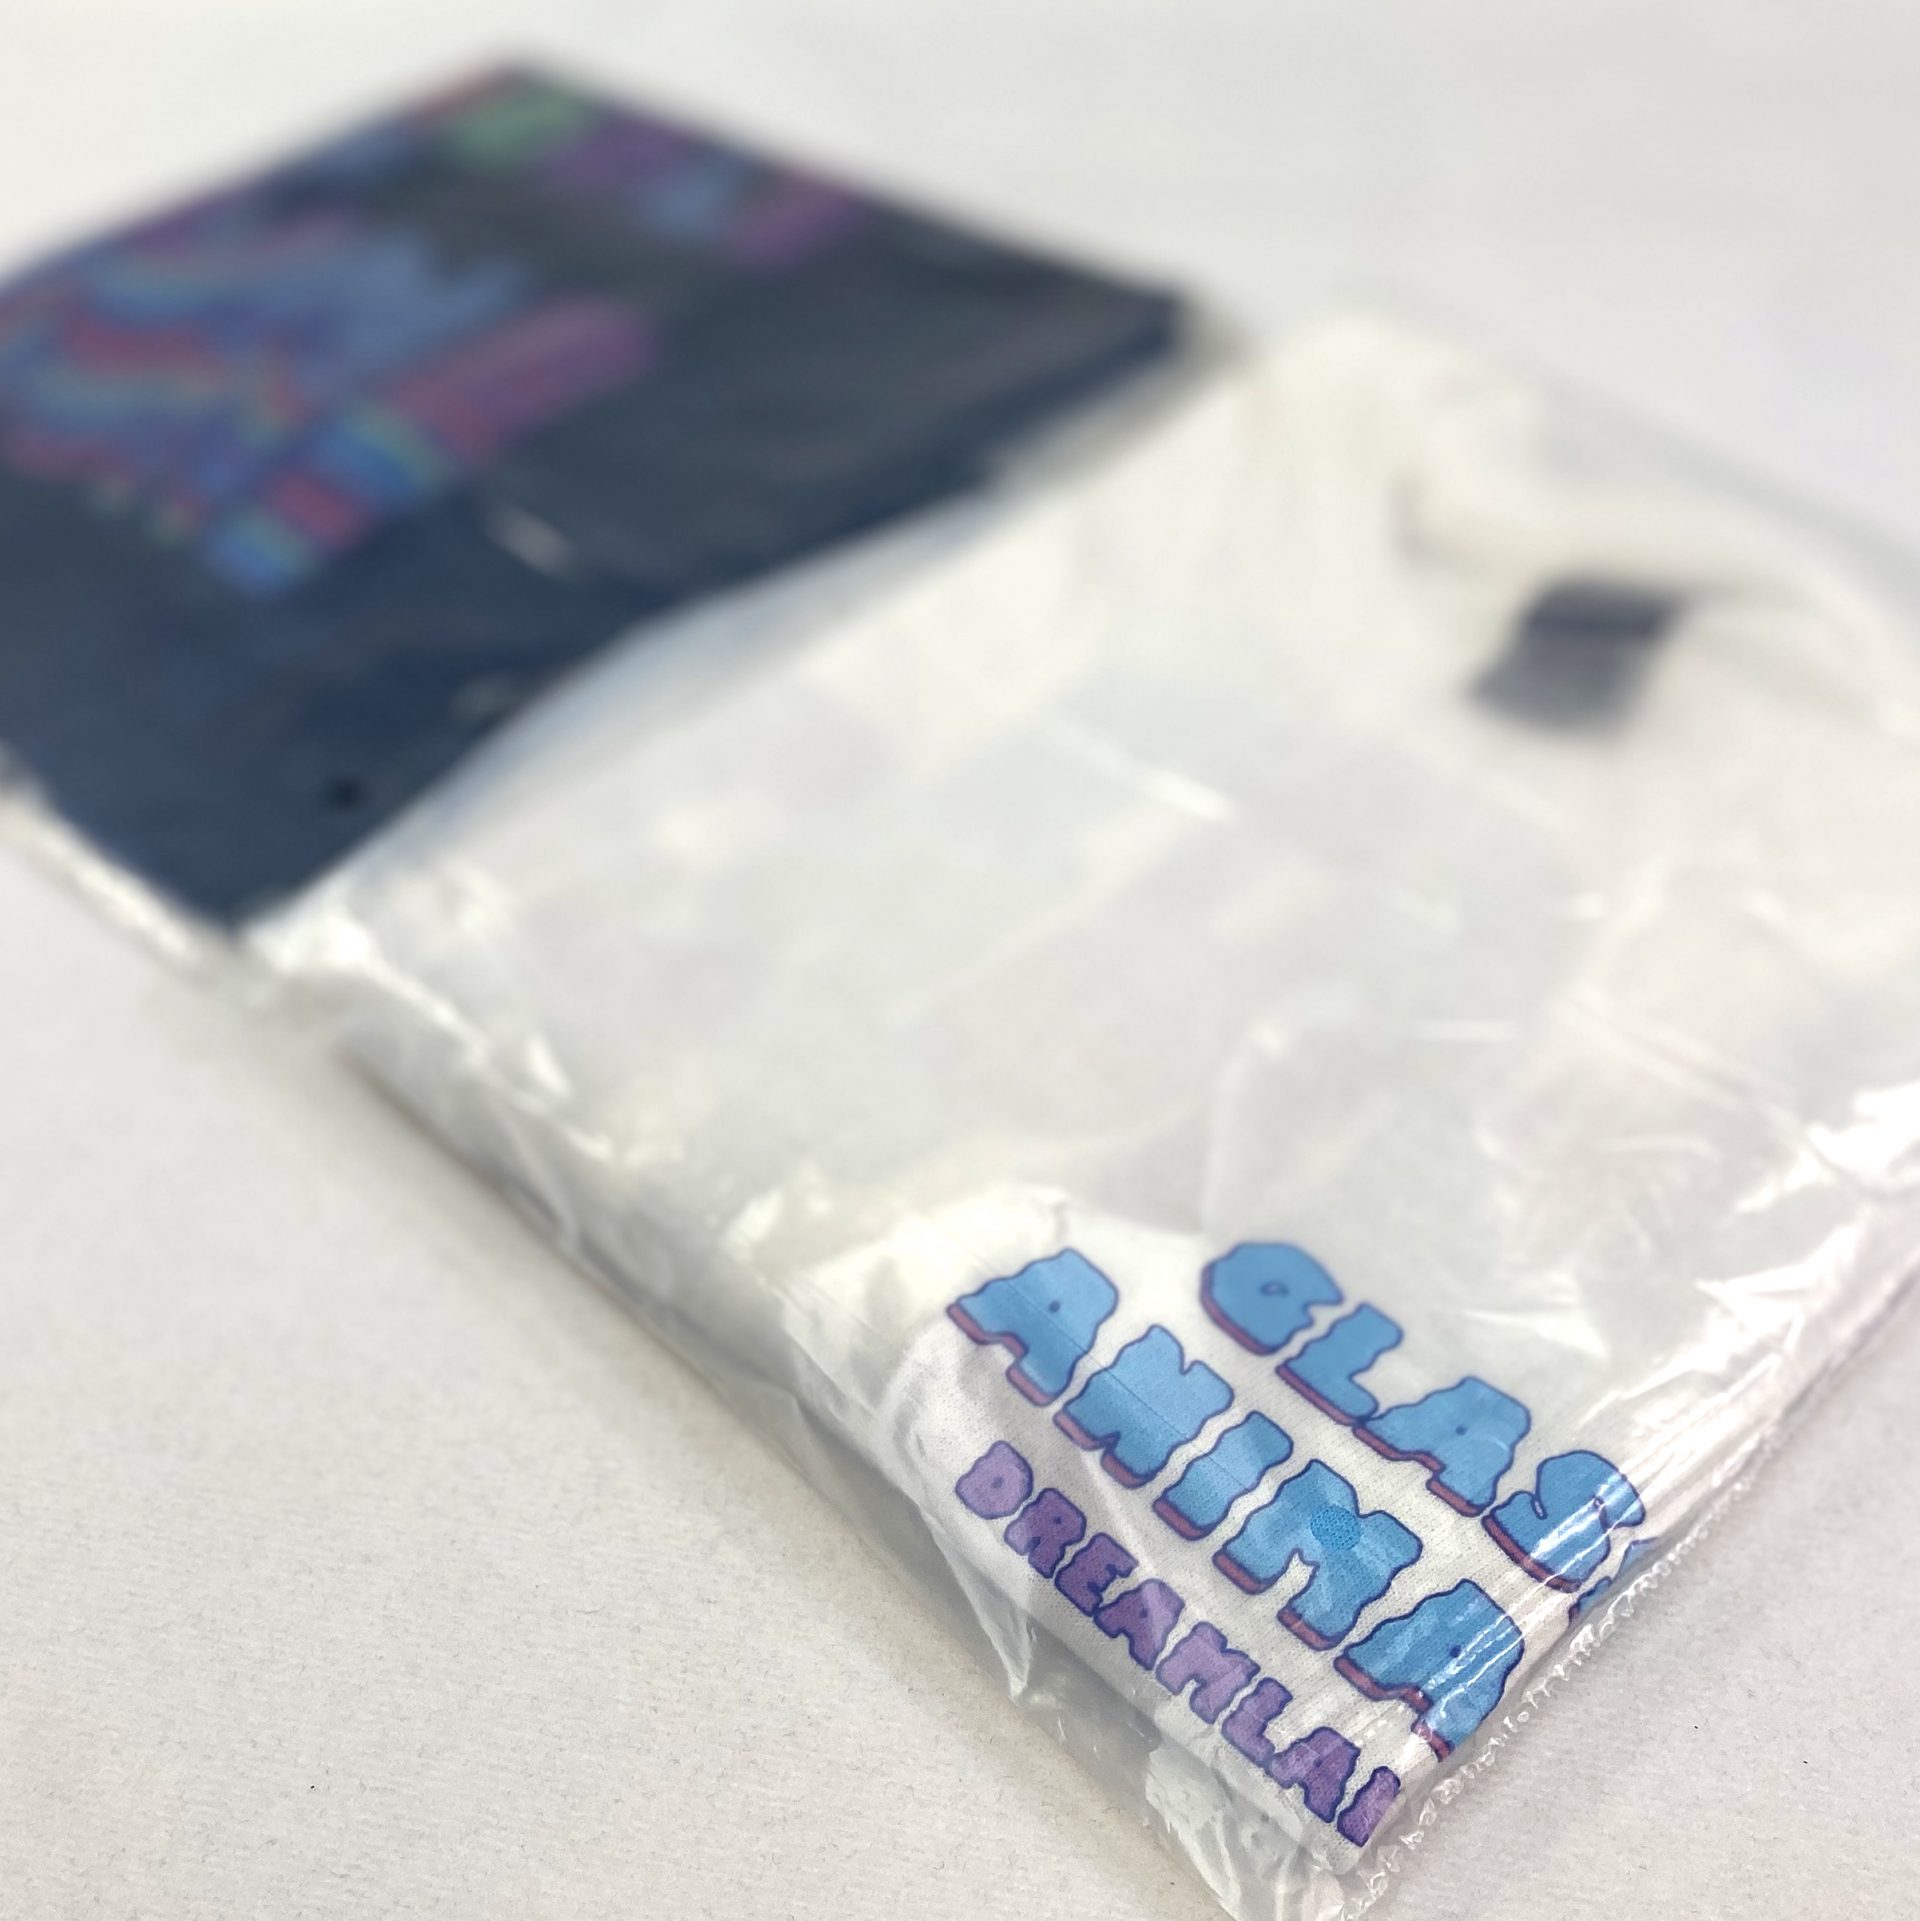 Biodegradable bags for printed textile merch